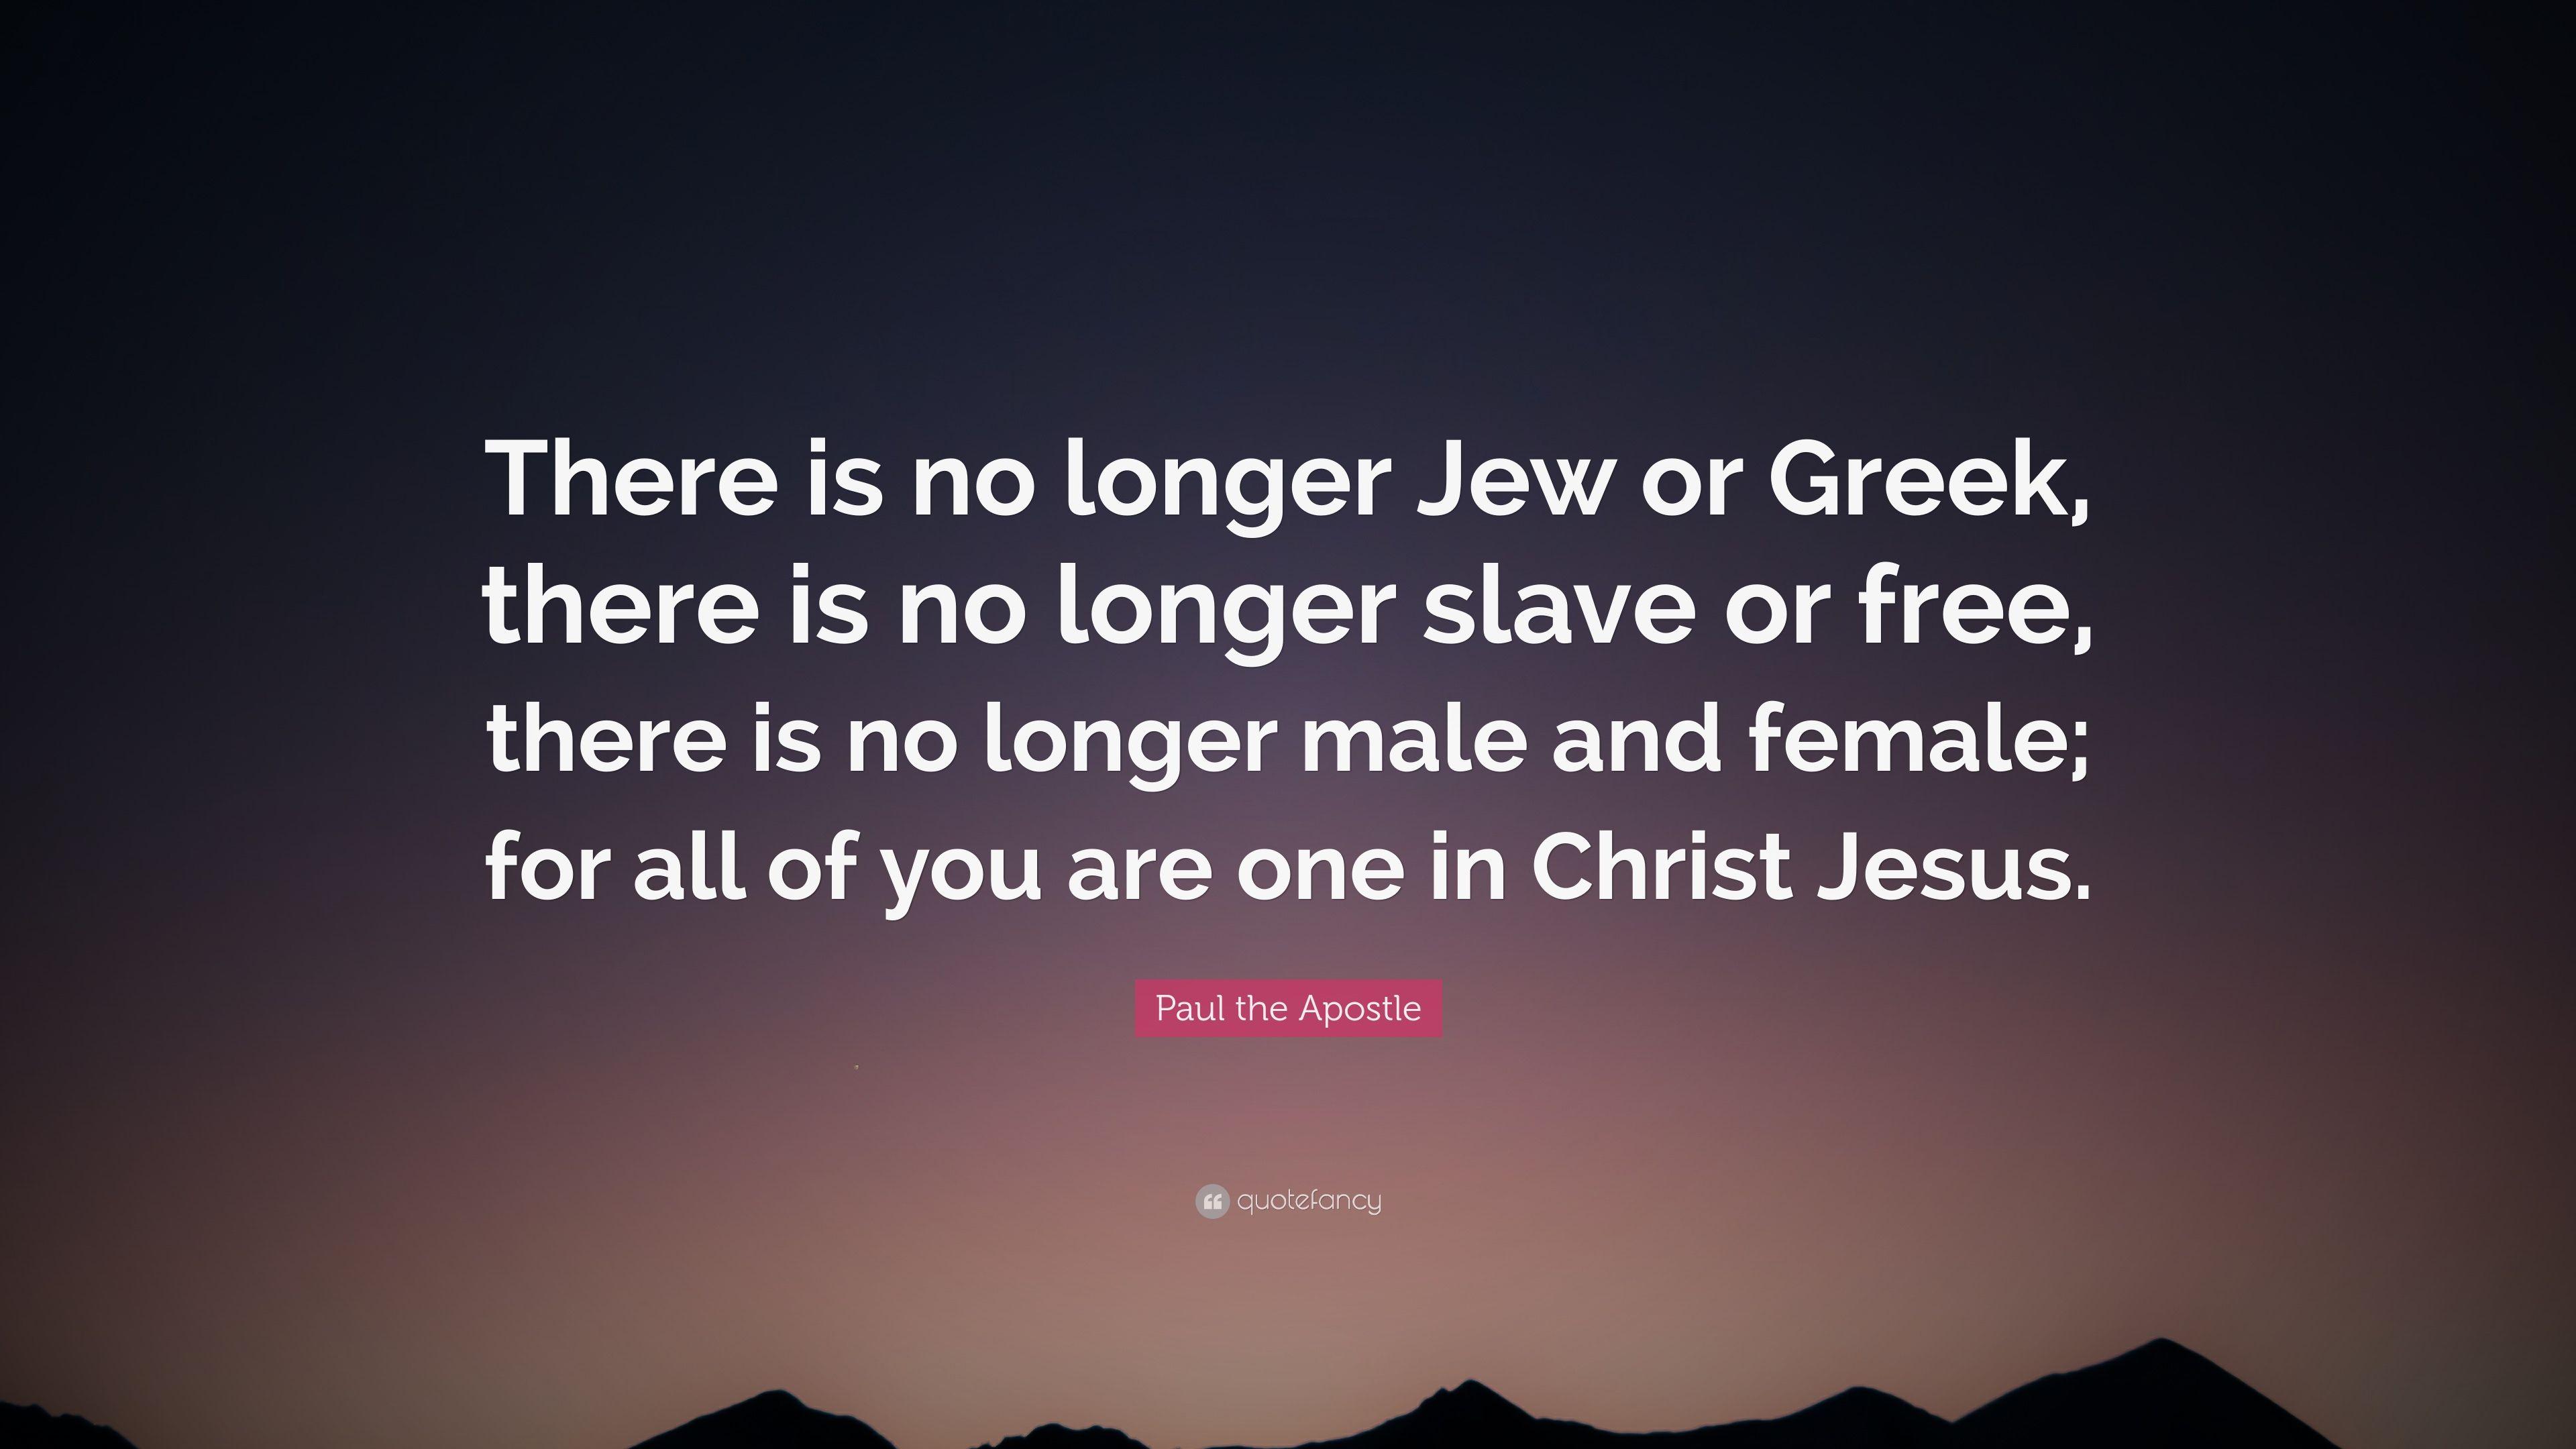 Paul the Apostle Quote: “There is no longer Jew or Greek, there is